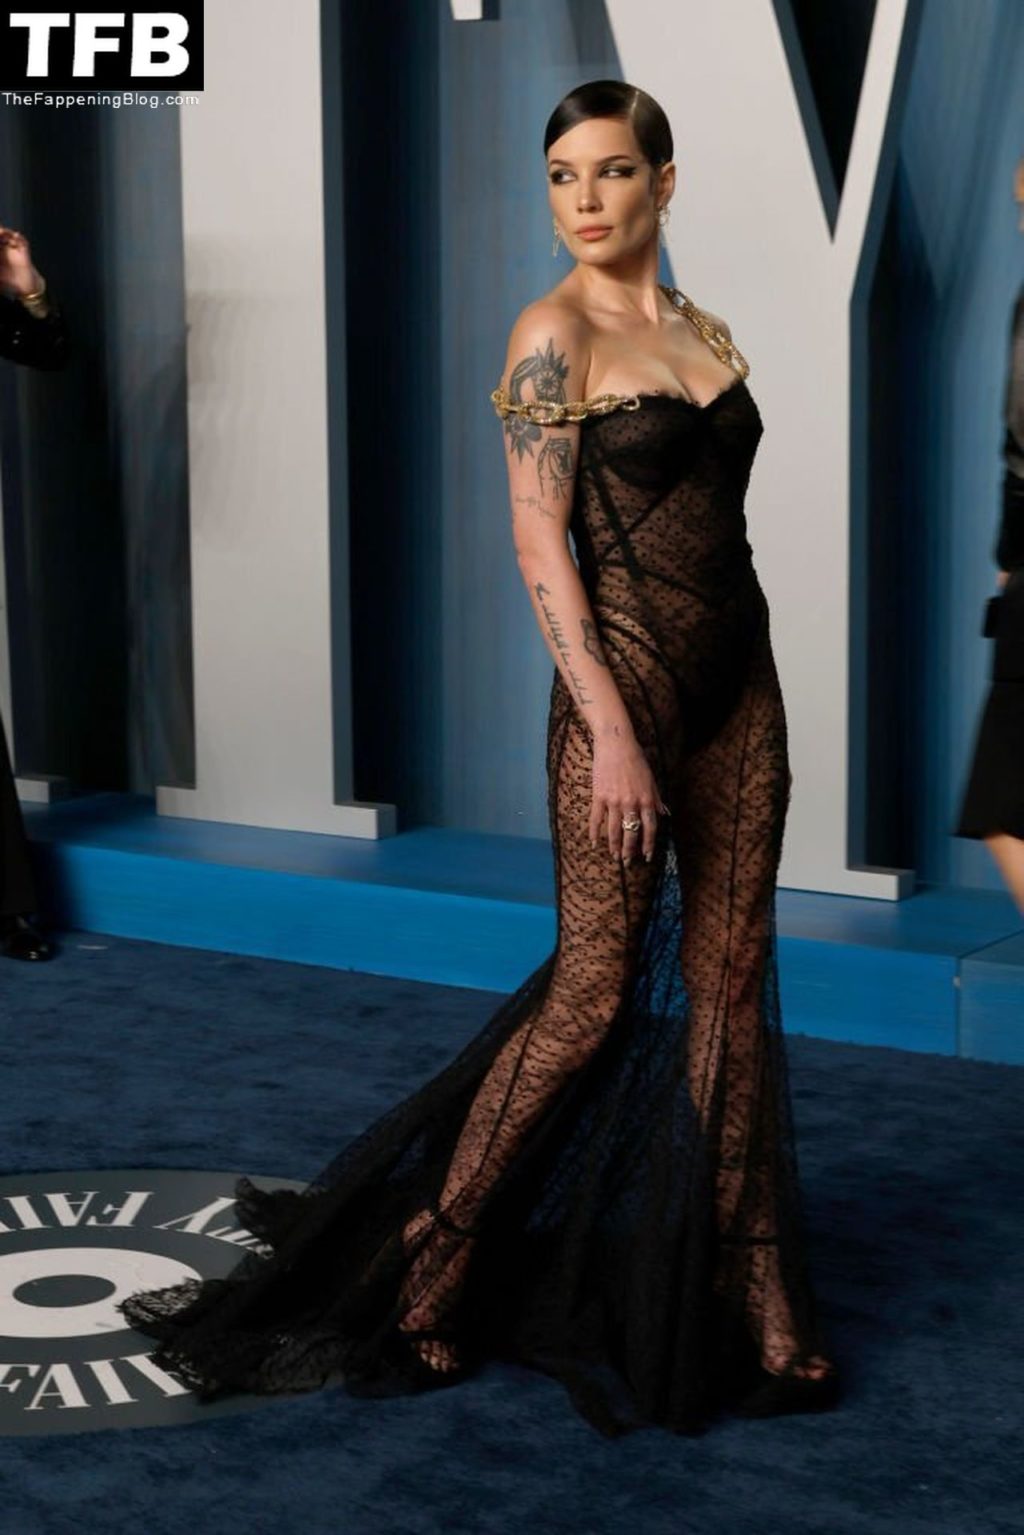 Halsey Sexy The Fappening Blog 2 2 1024x1535 - Halsey Looks Hot in a See-Through Dress at the 2022 Vanity Fair Oscar Party (11 Photos)